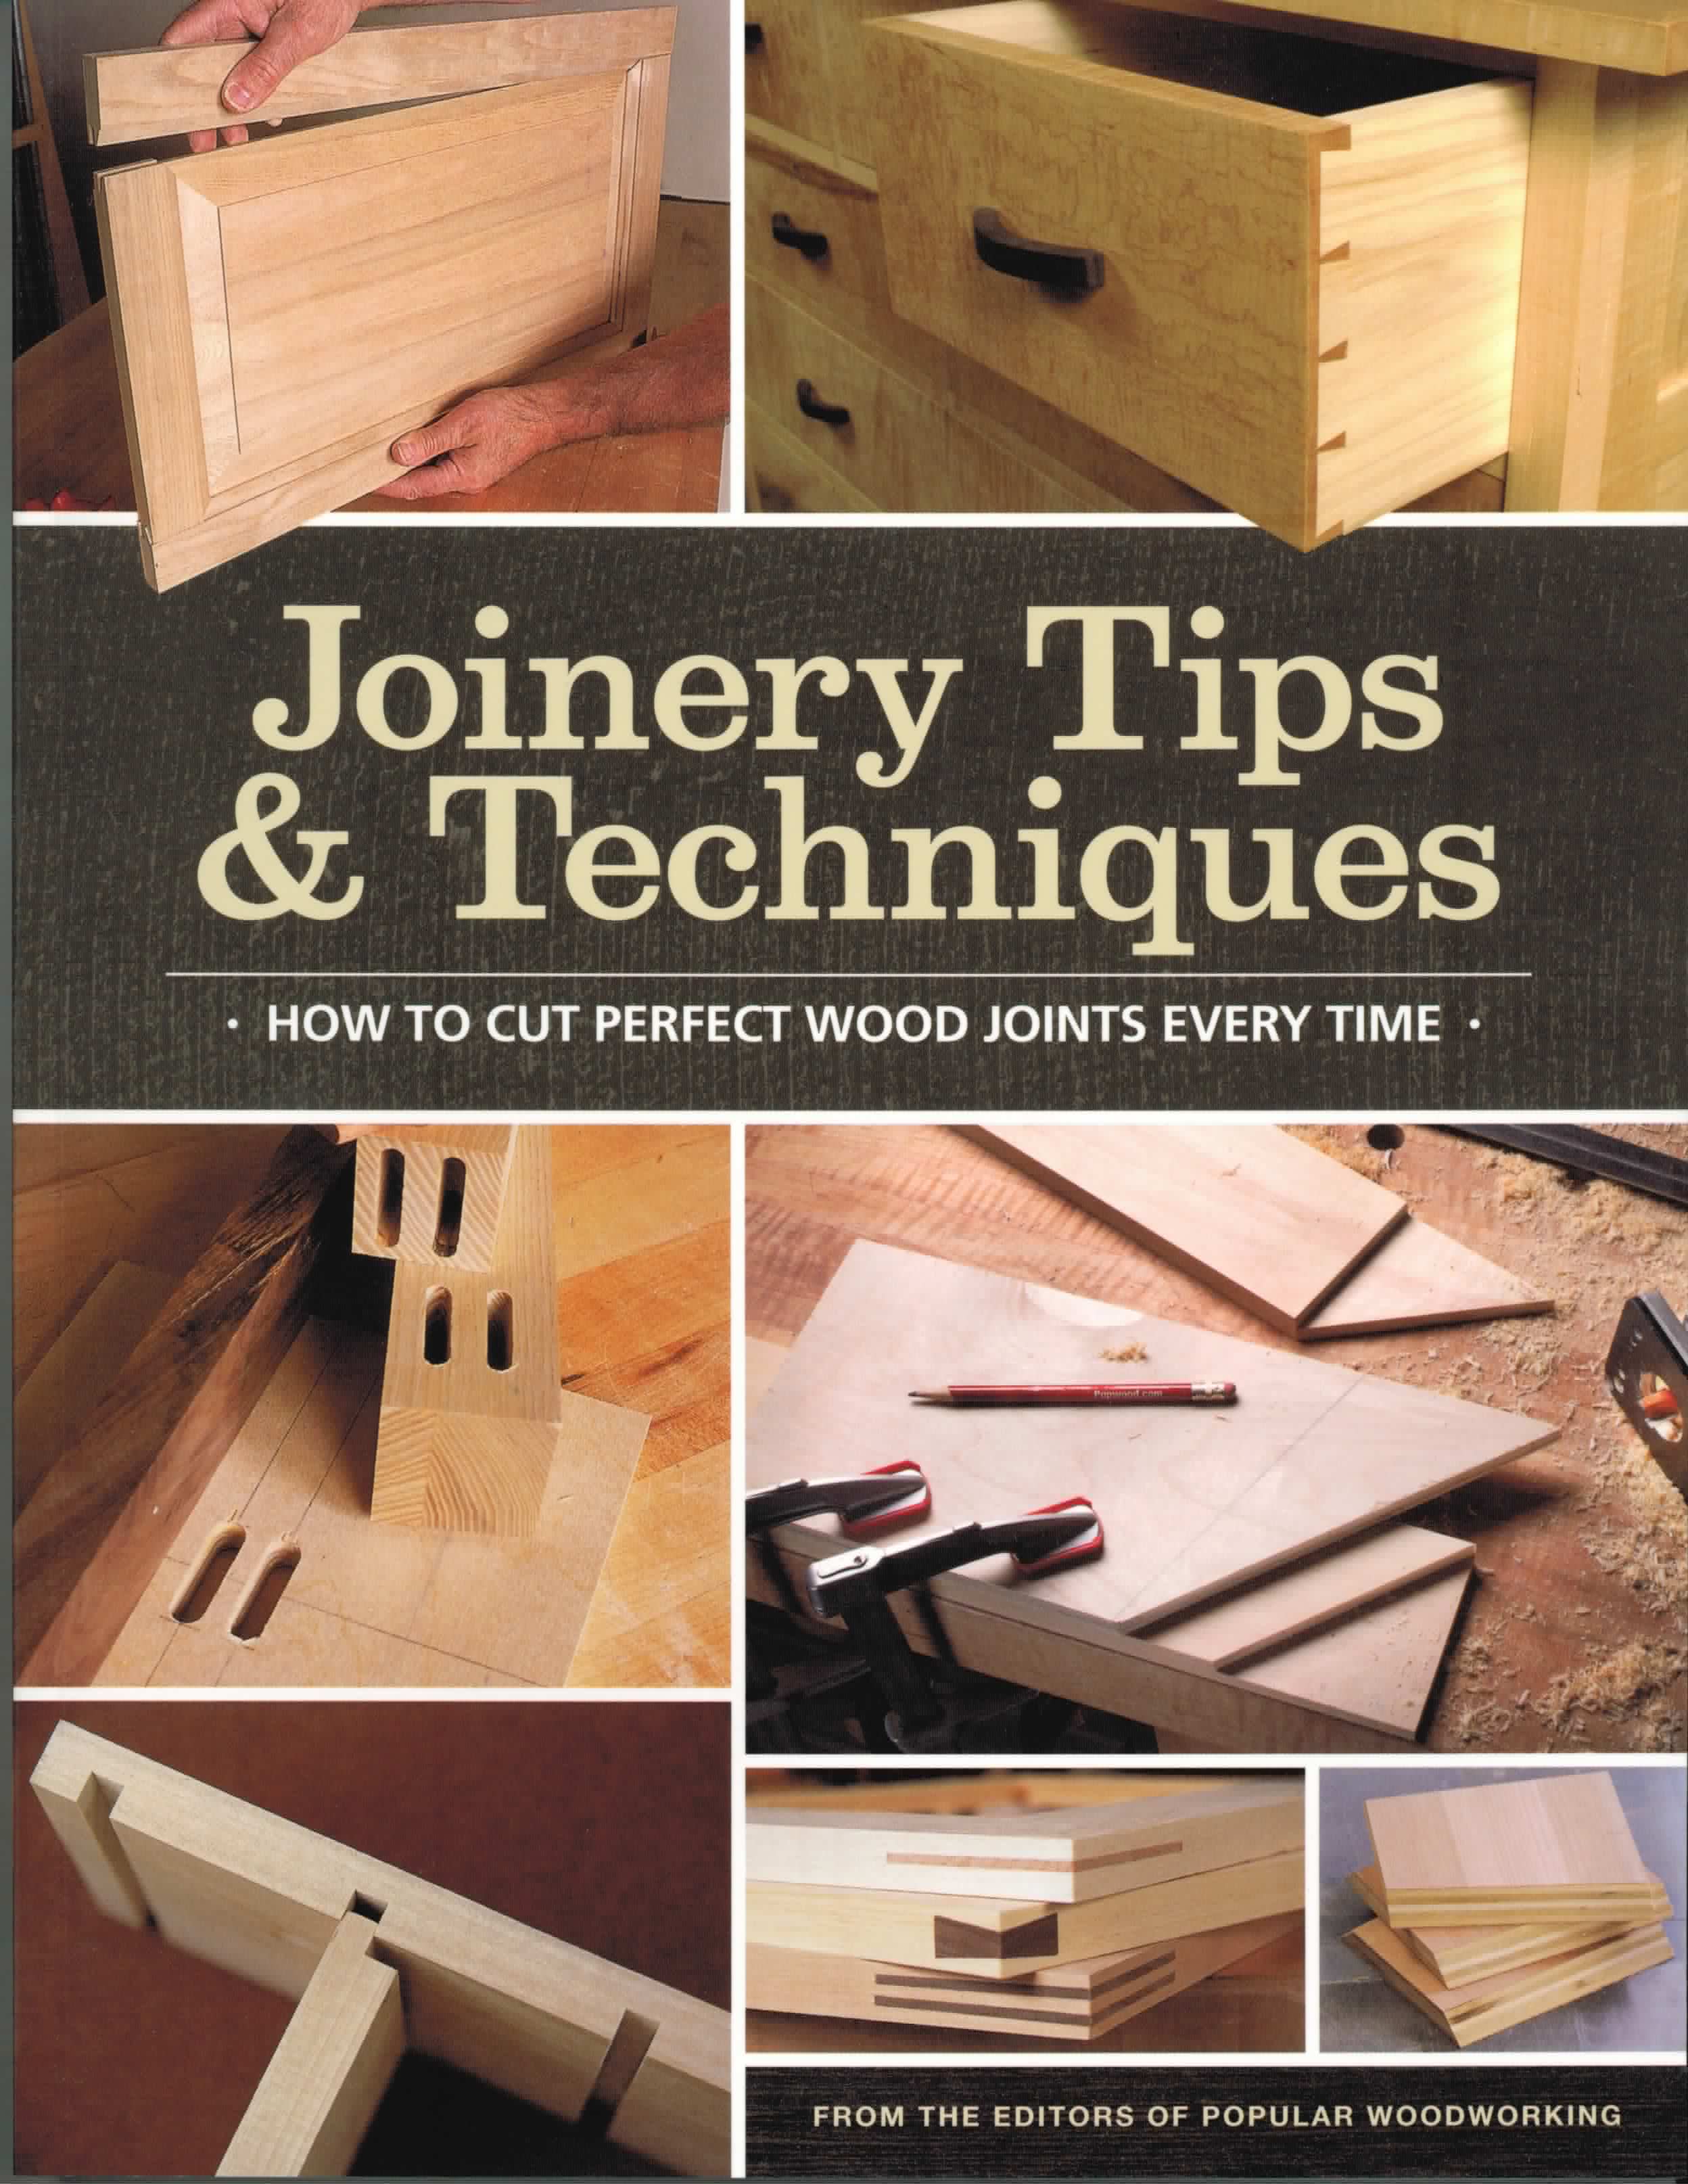 Home woodworking books Main Image